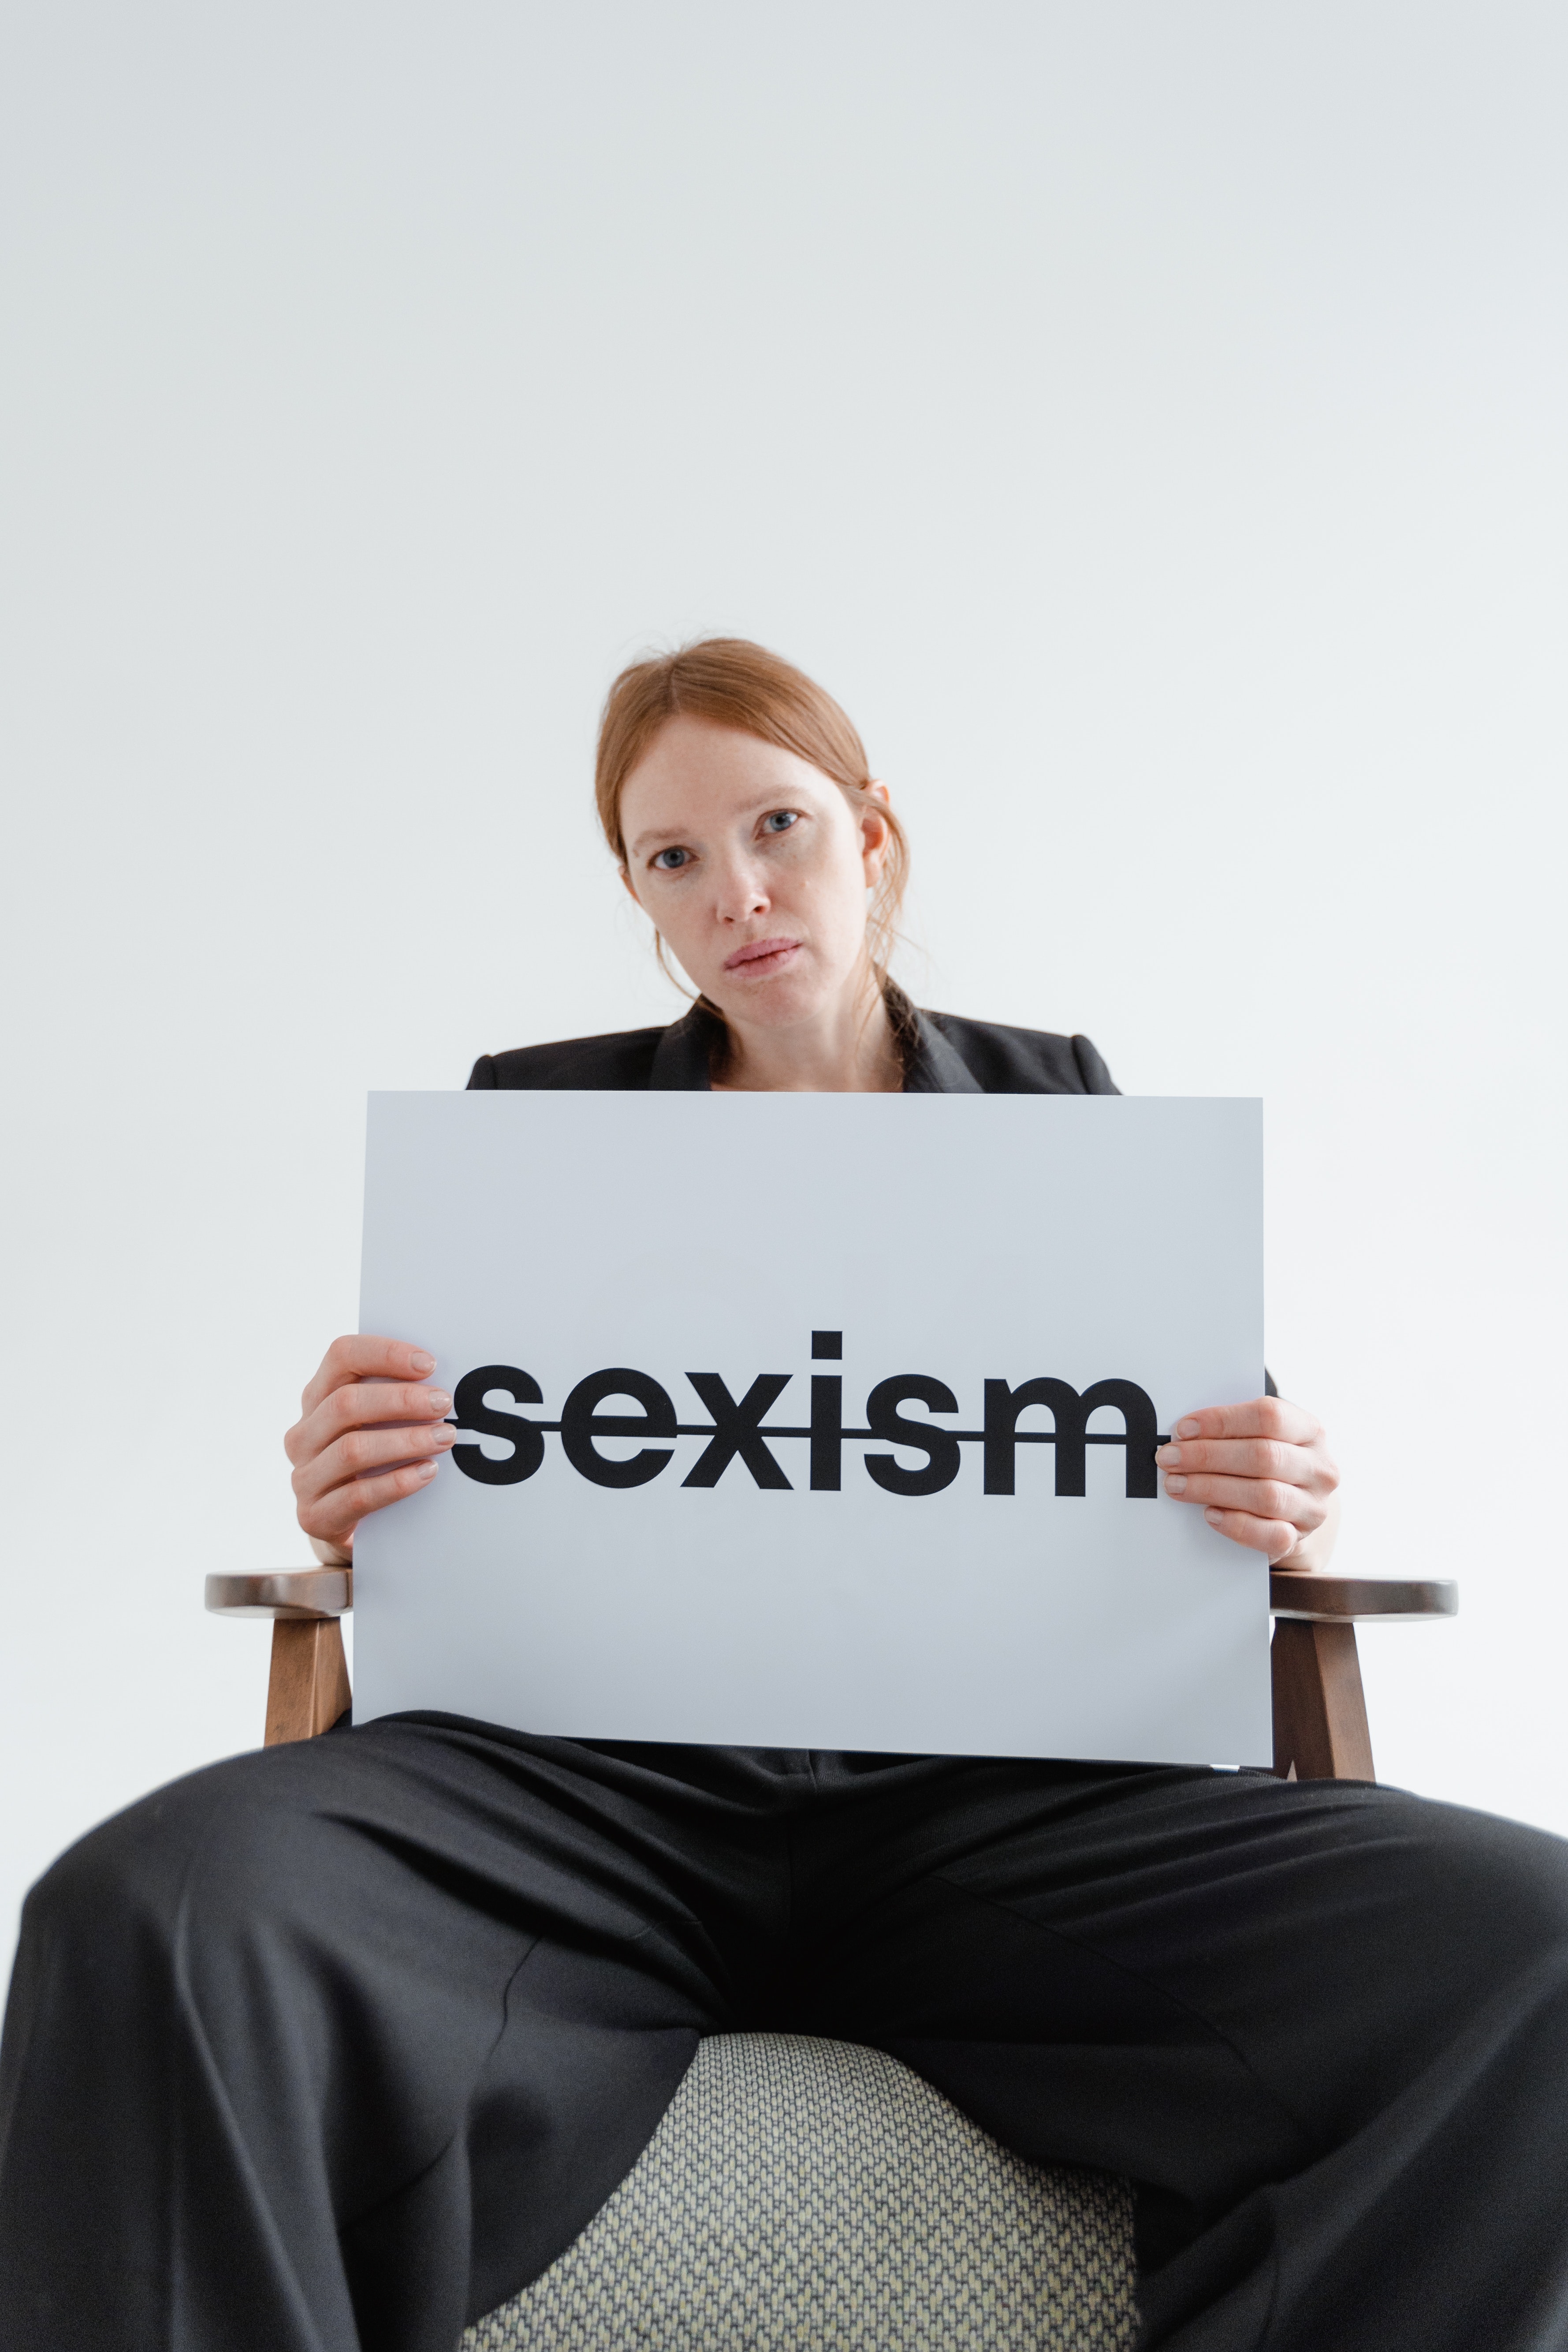 woman-holding-sign-sexism-the-everyday-sexism-project